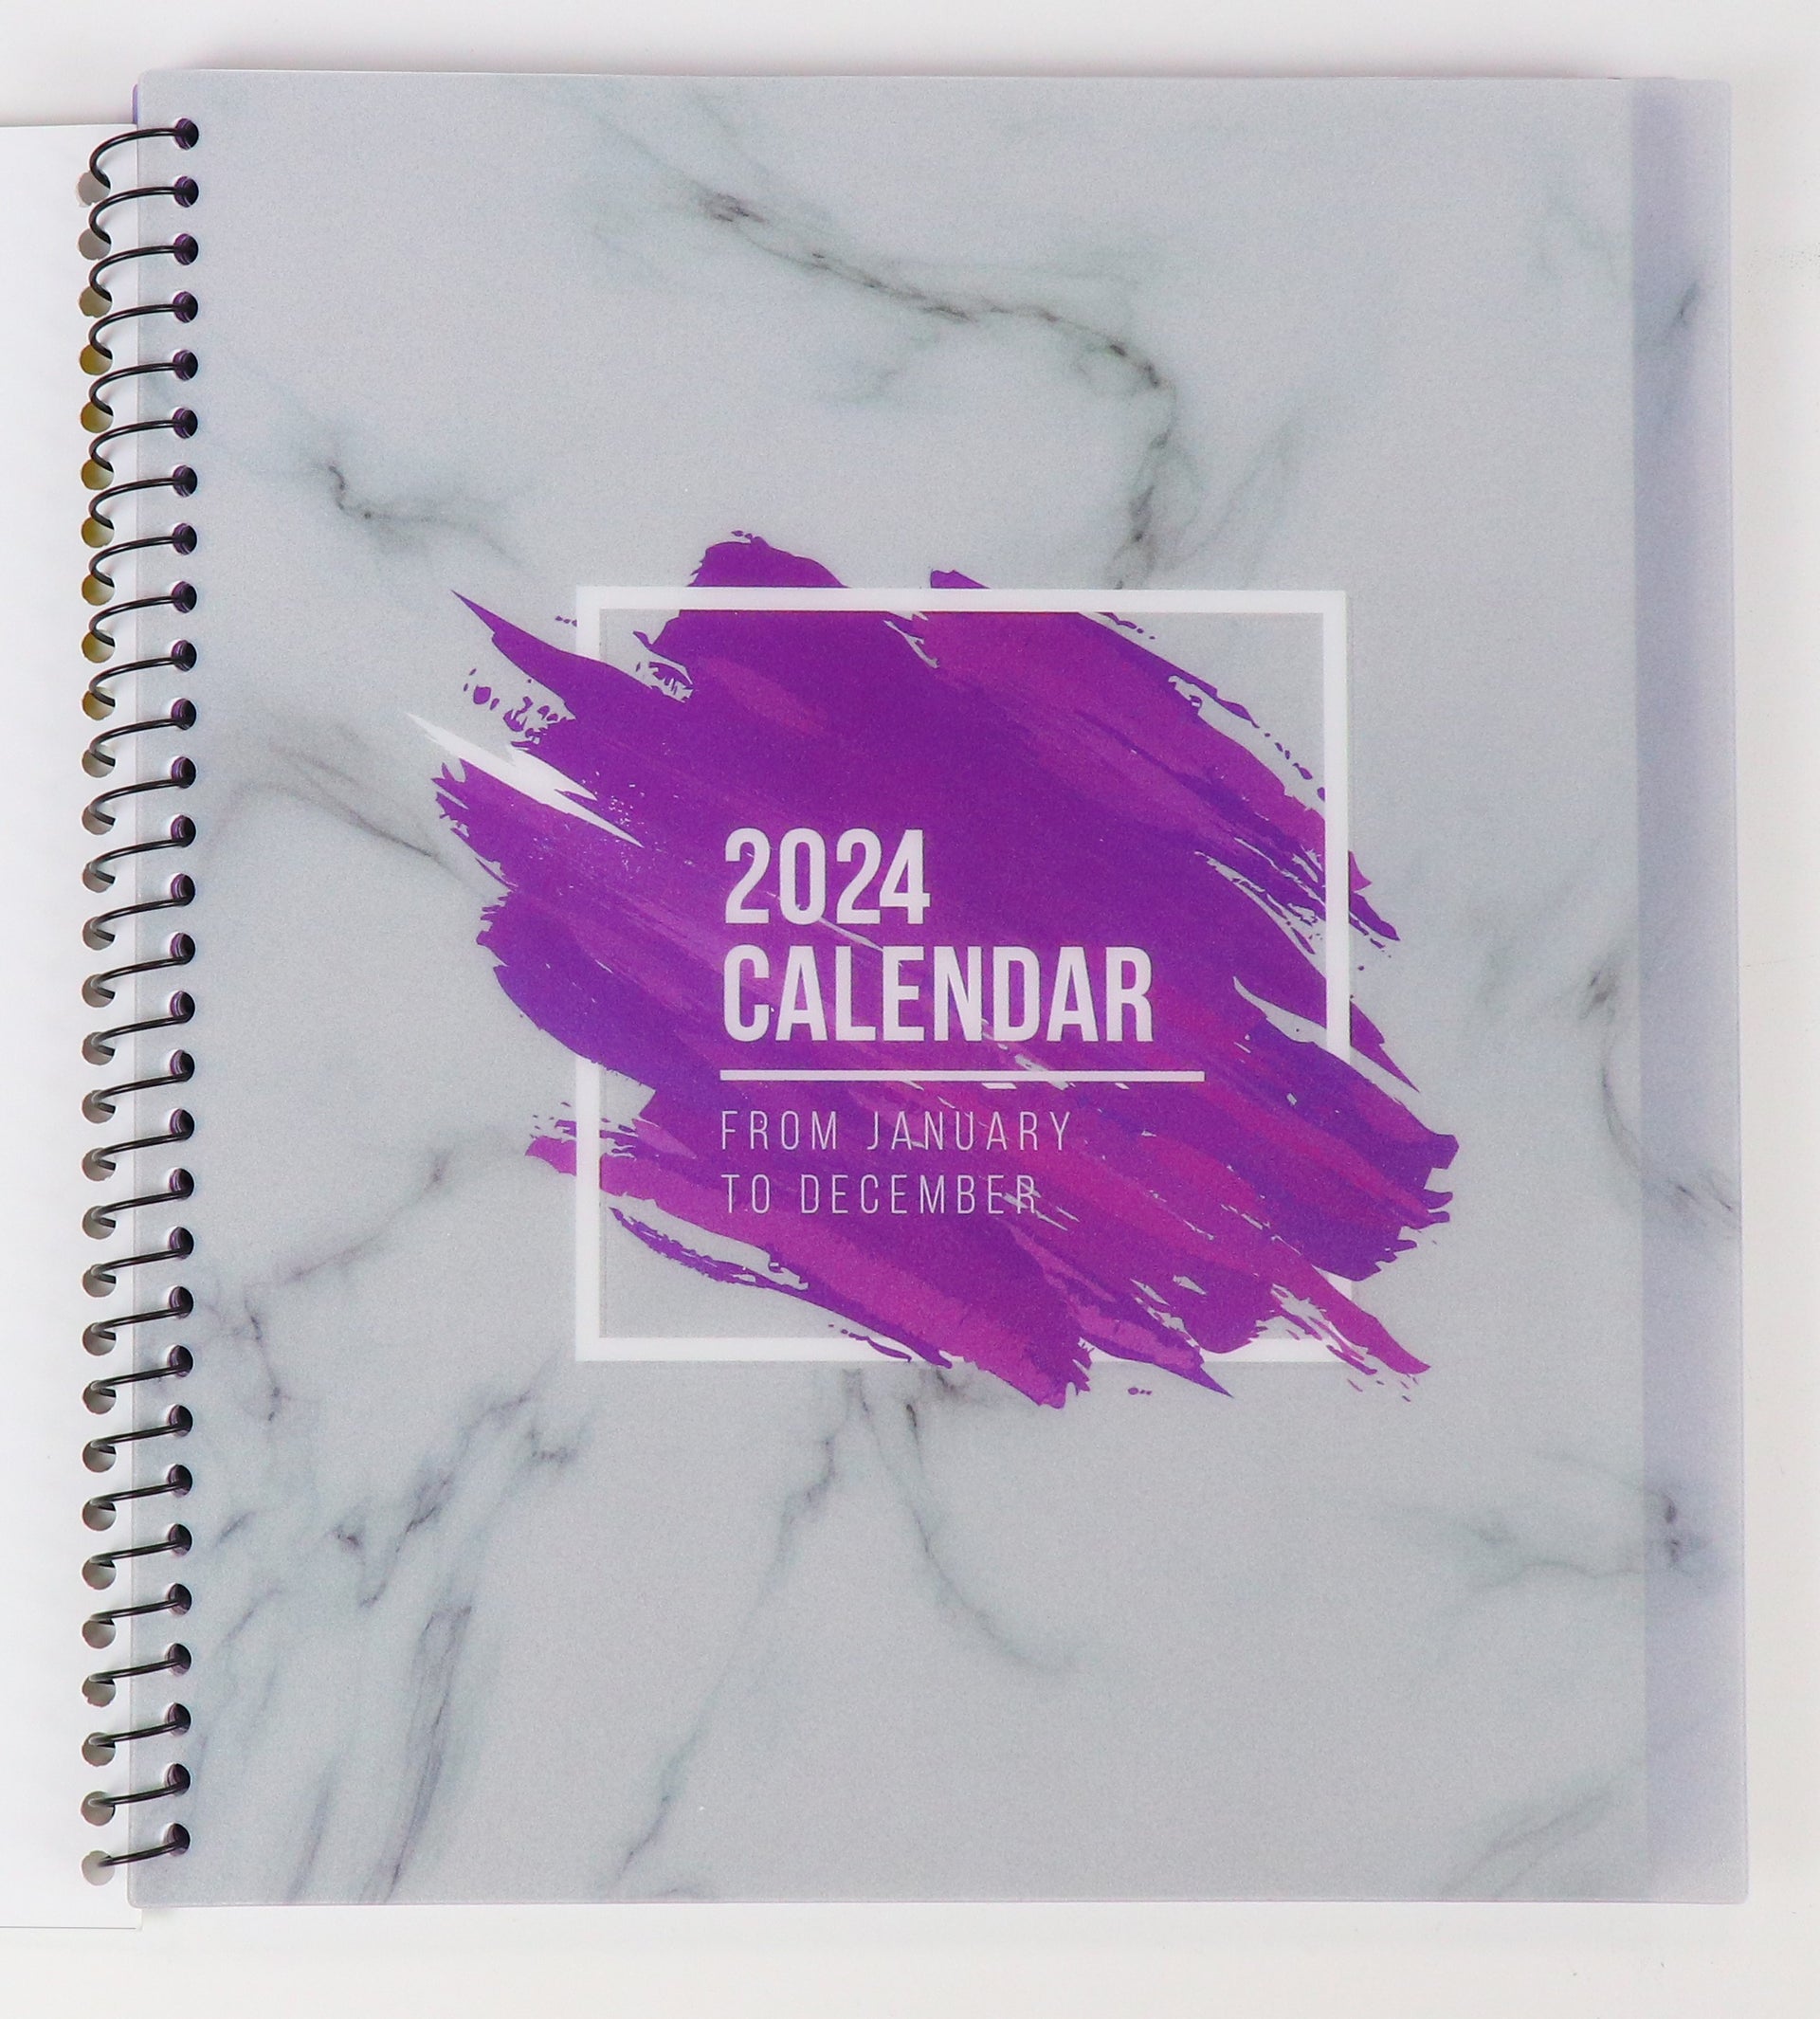 NOW 50% Off! RE-FOCUS THE CREATIVE OFFICE, 2024 Calendar, Monthly and Weekly Views with To-Do List